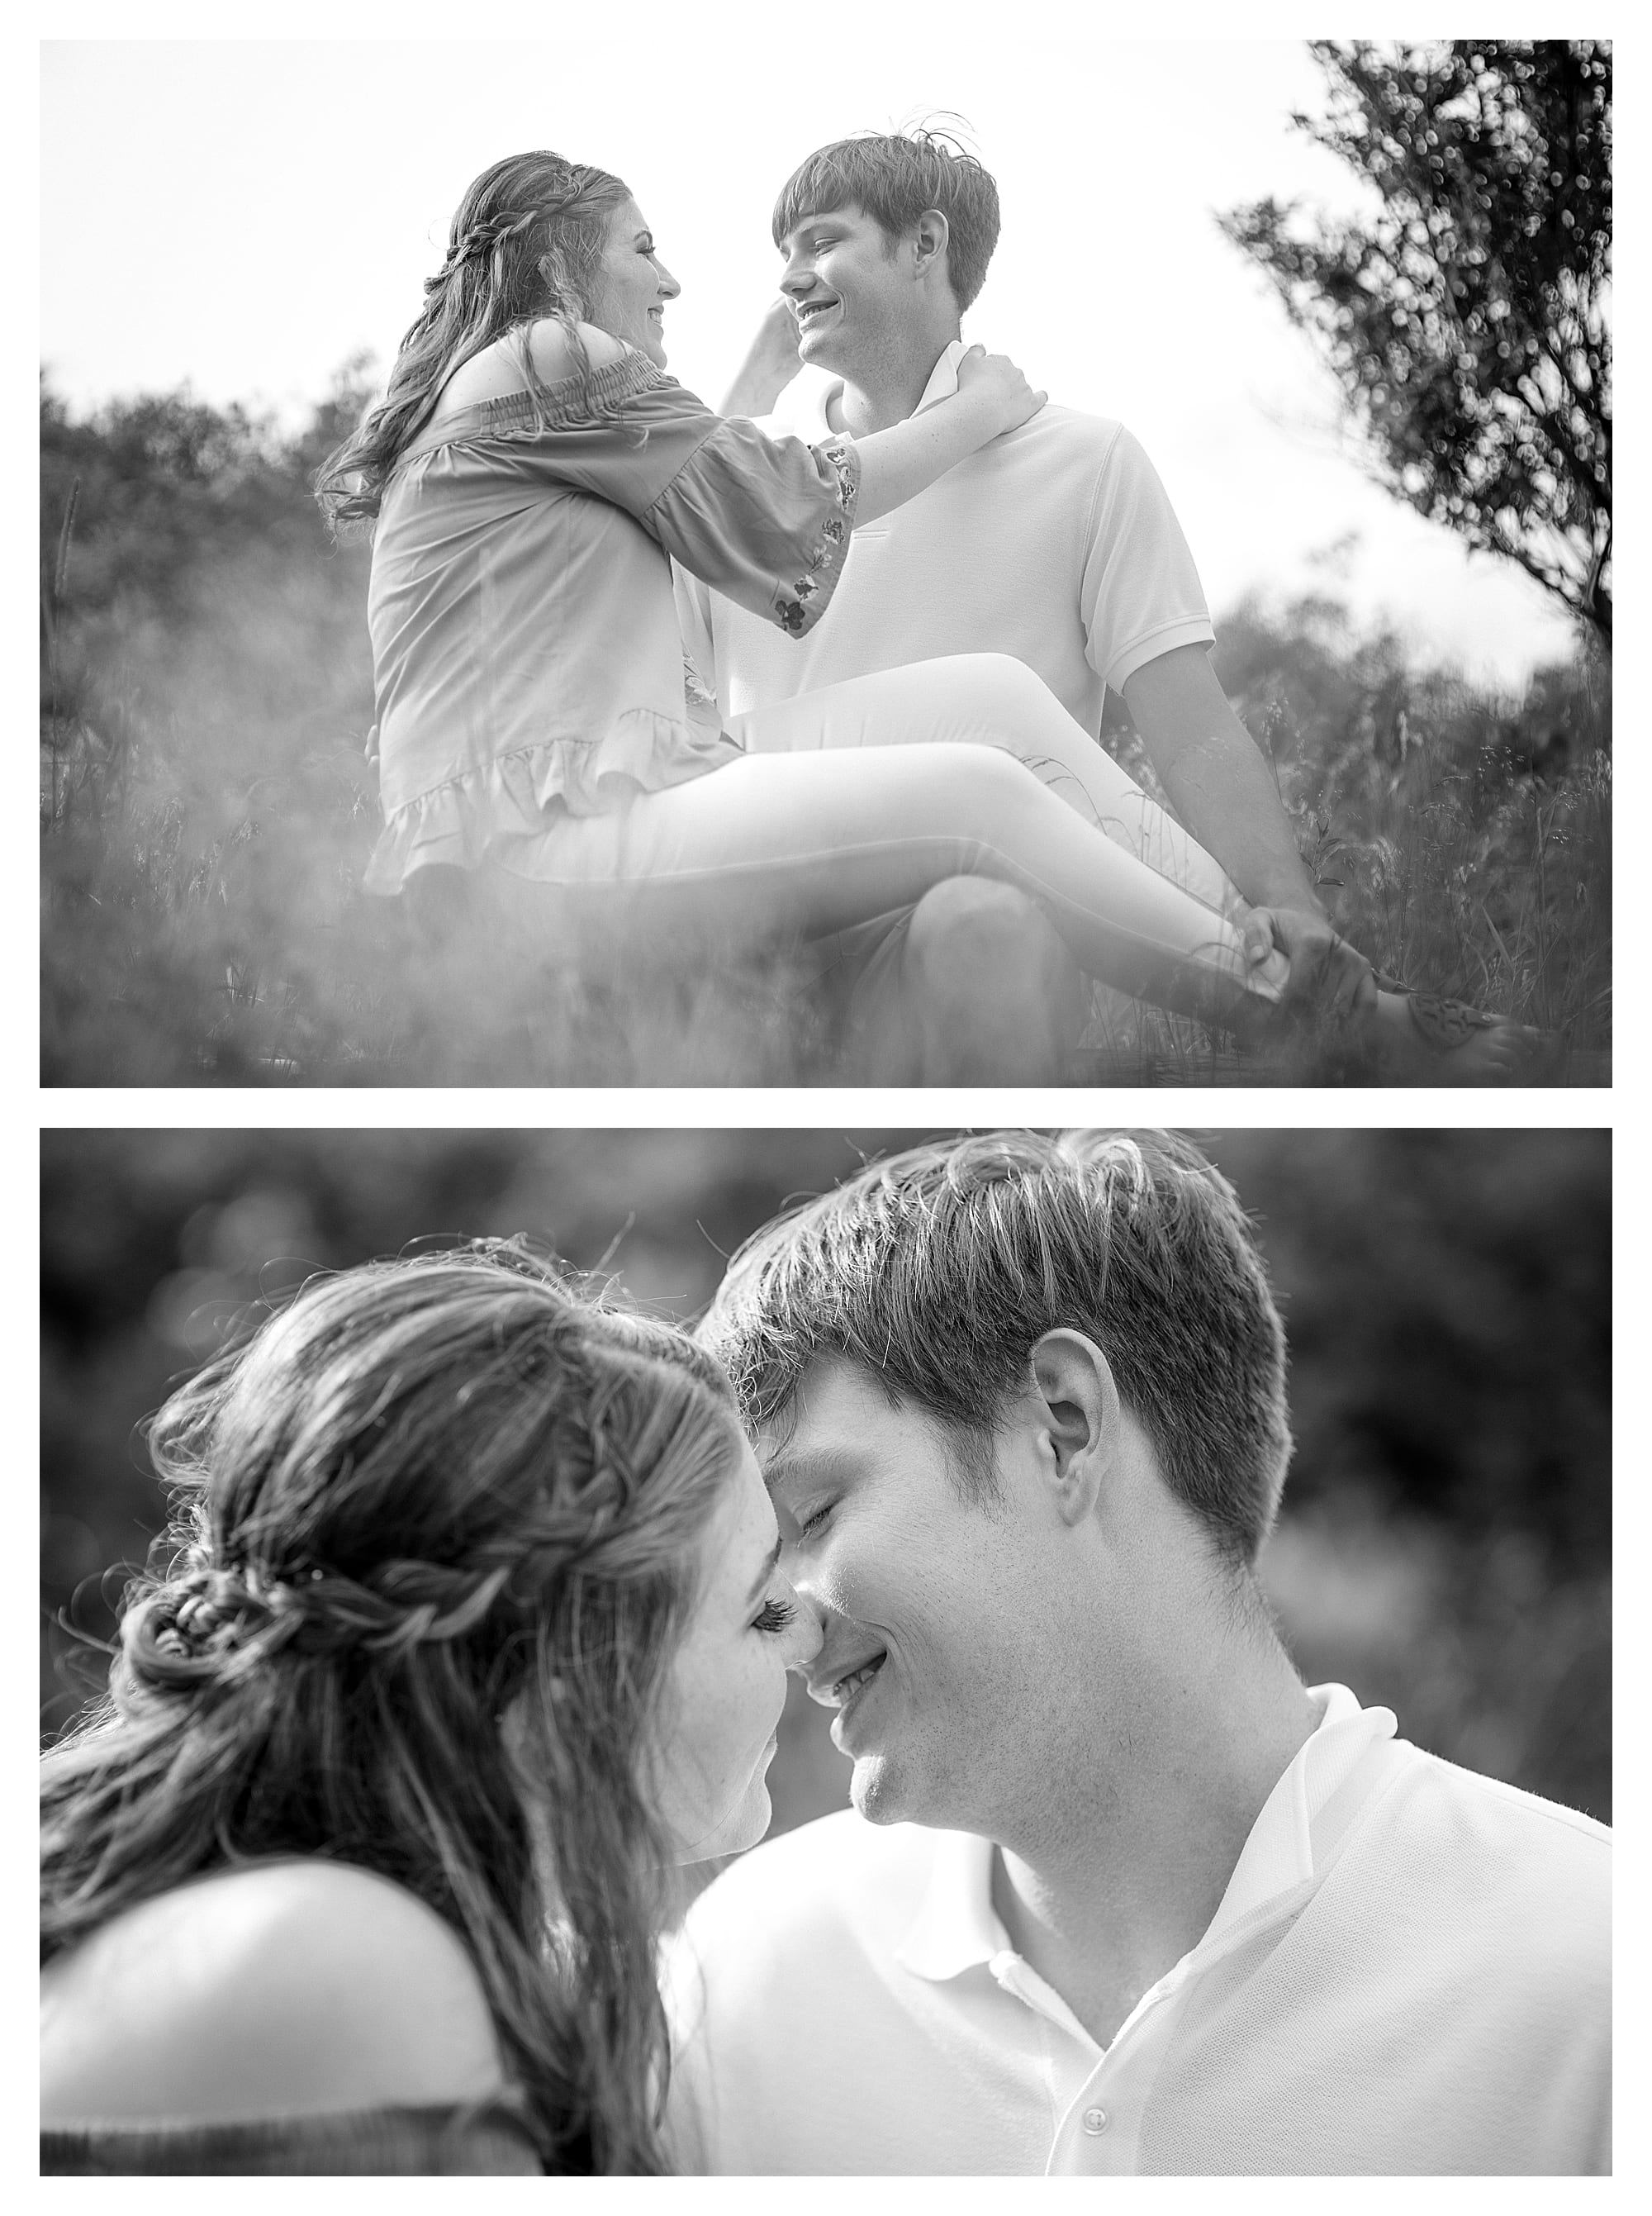 Black and white photos of young engaged couple sitting in a grassy field laughing with one another